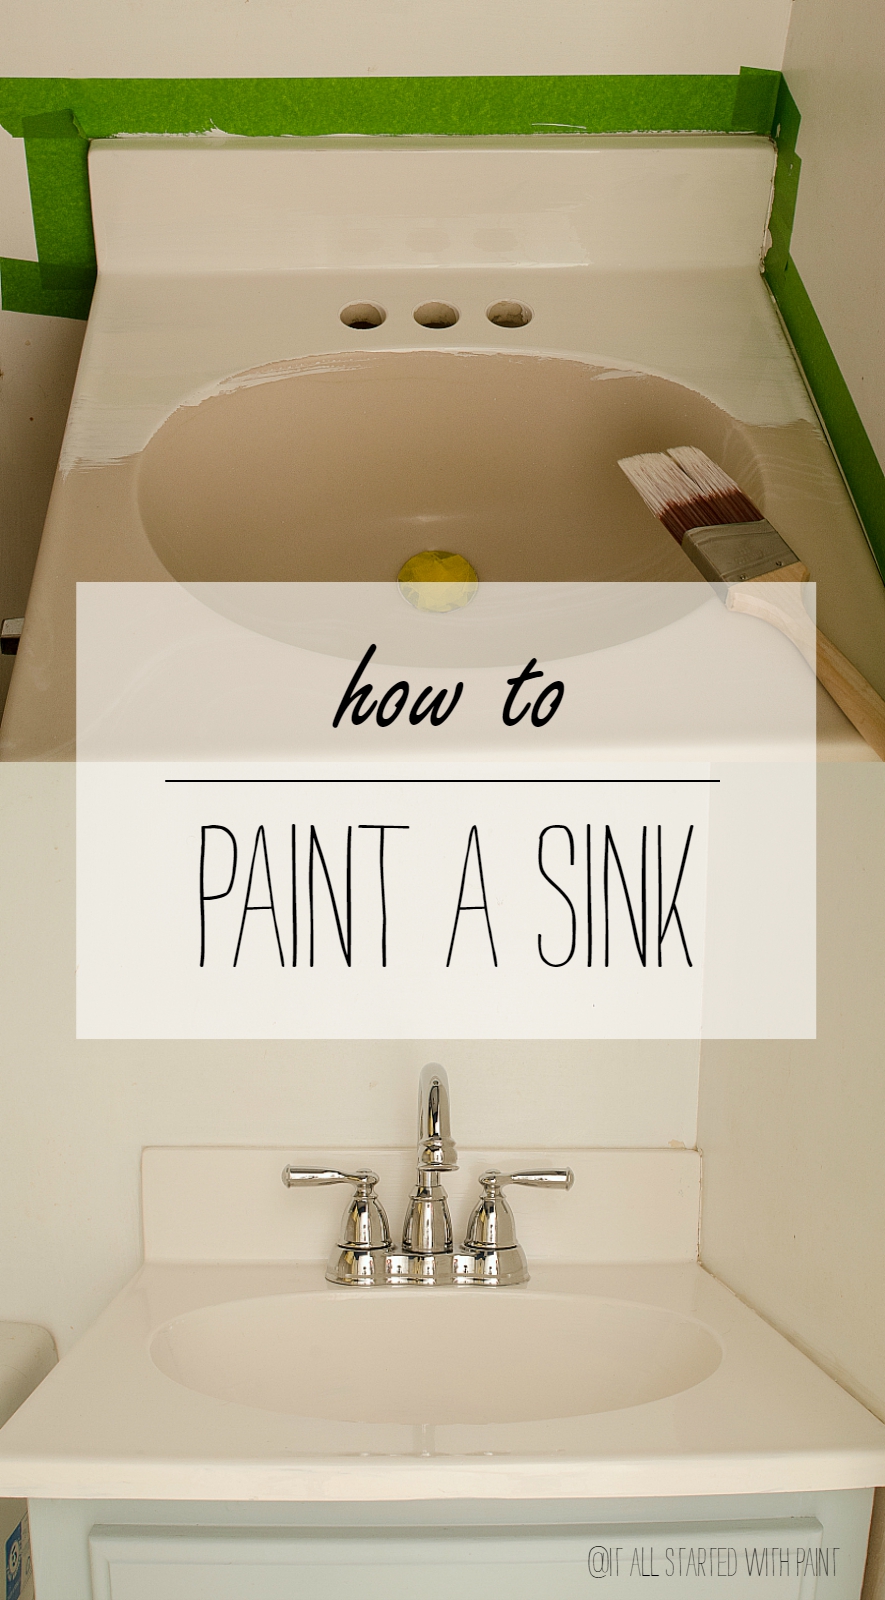 How To Paint A Bathroom Sink: Quick, Easy and Inexpensive Way To Update Your Bathroom - No Plumber Needed!